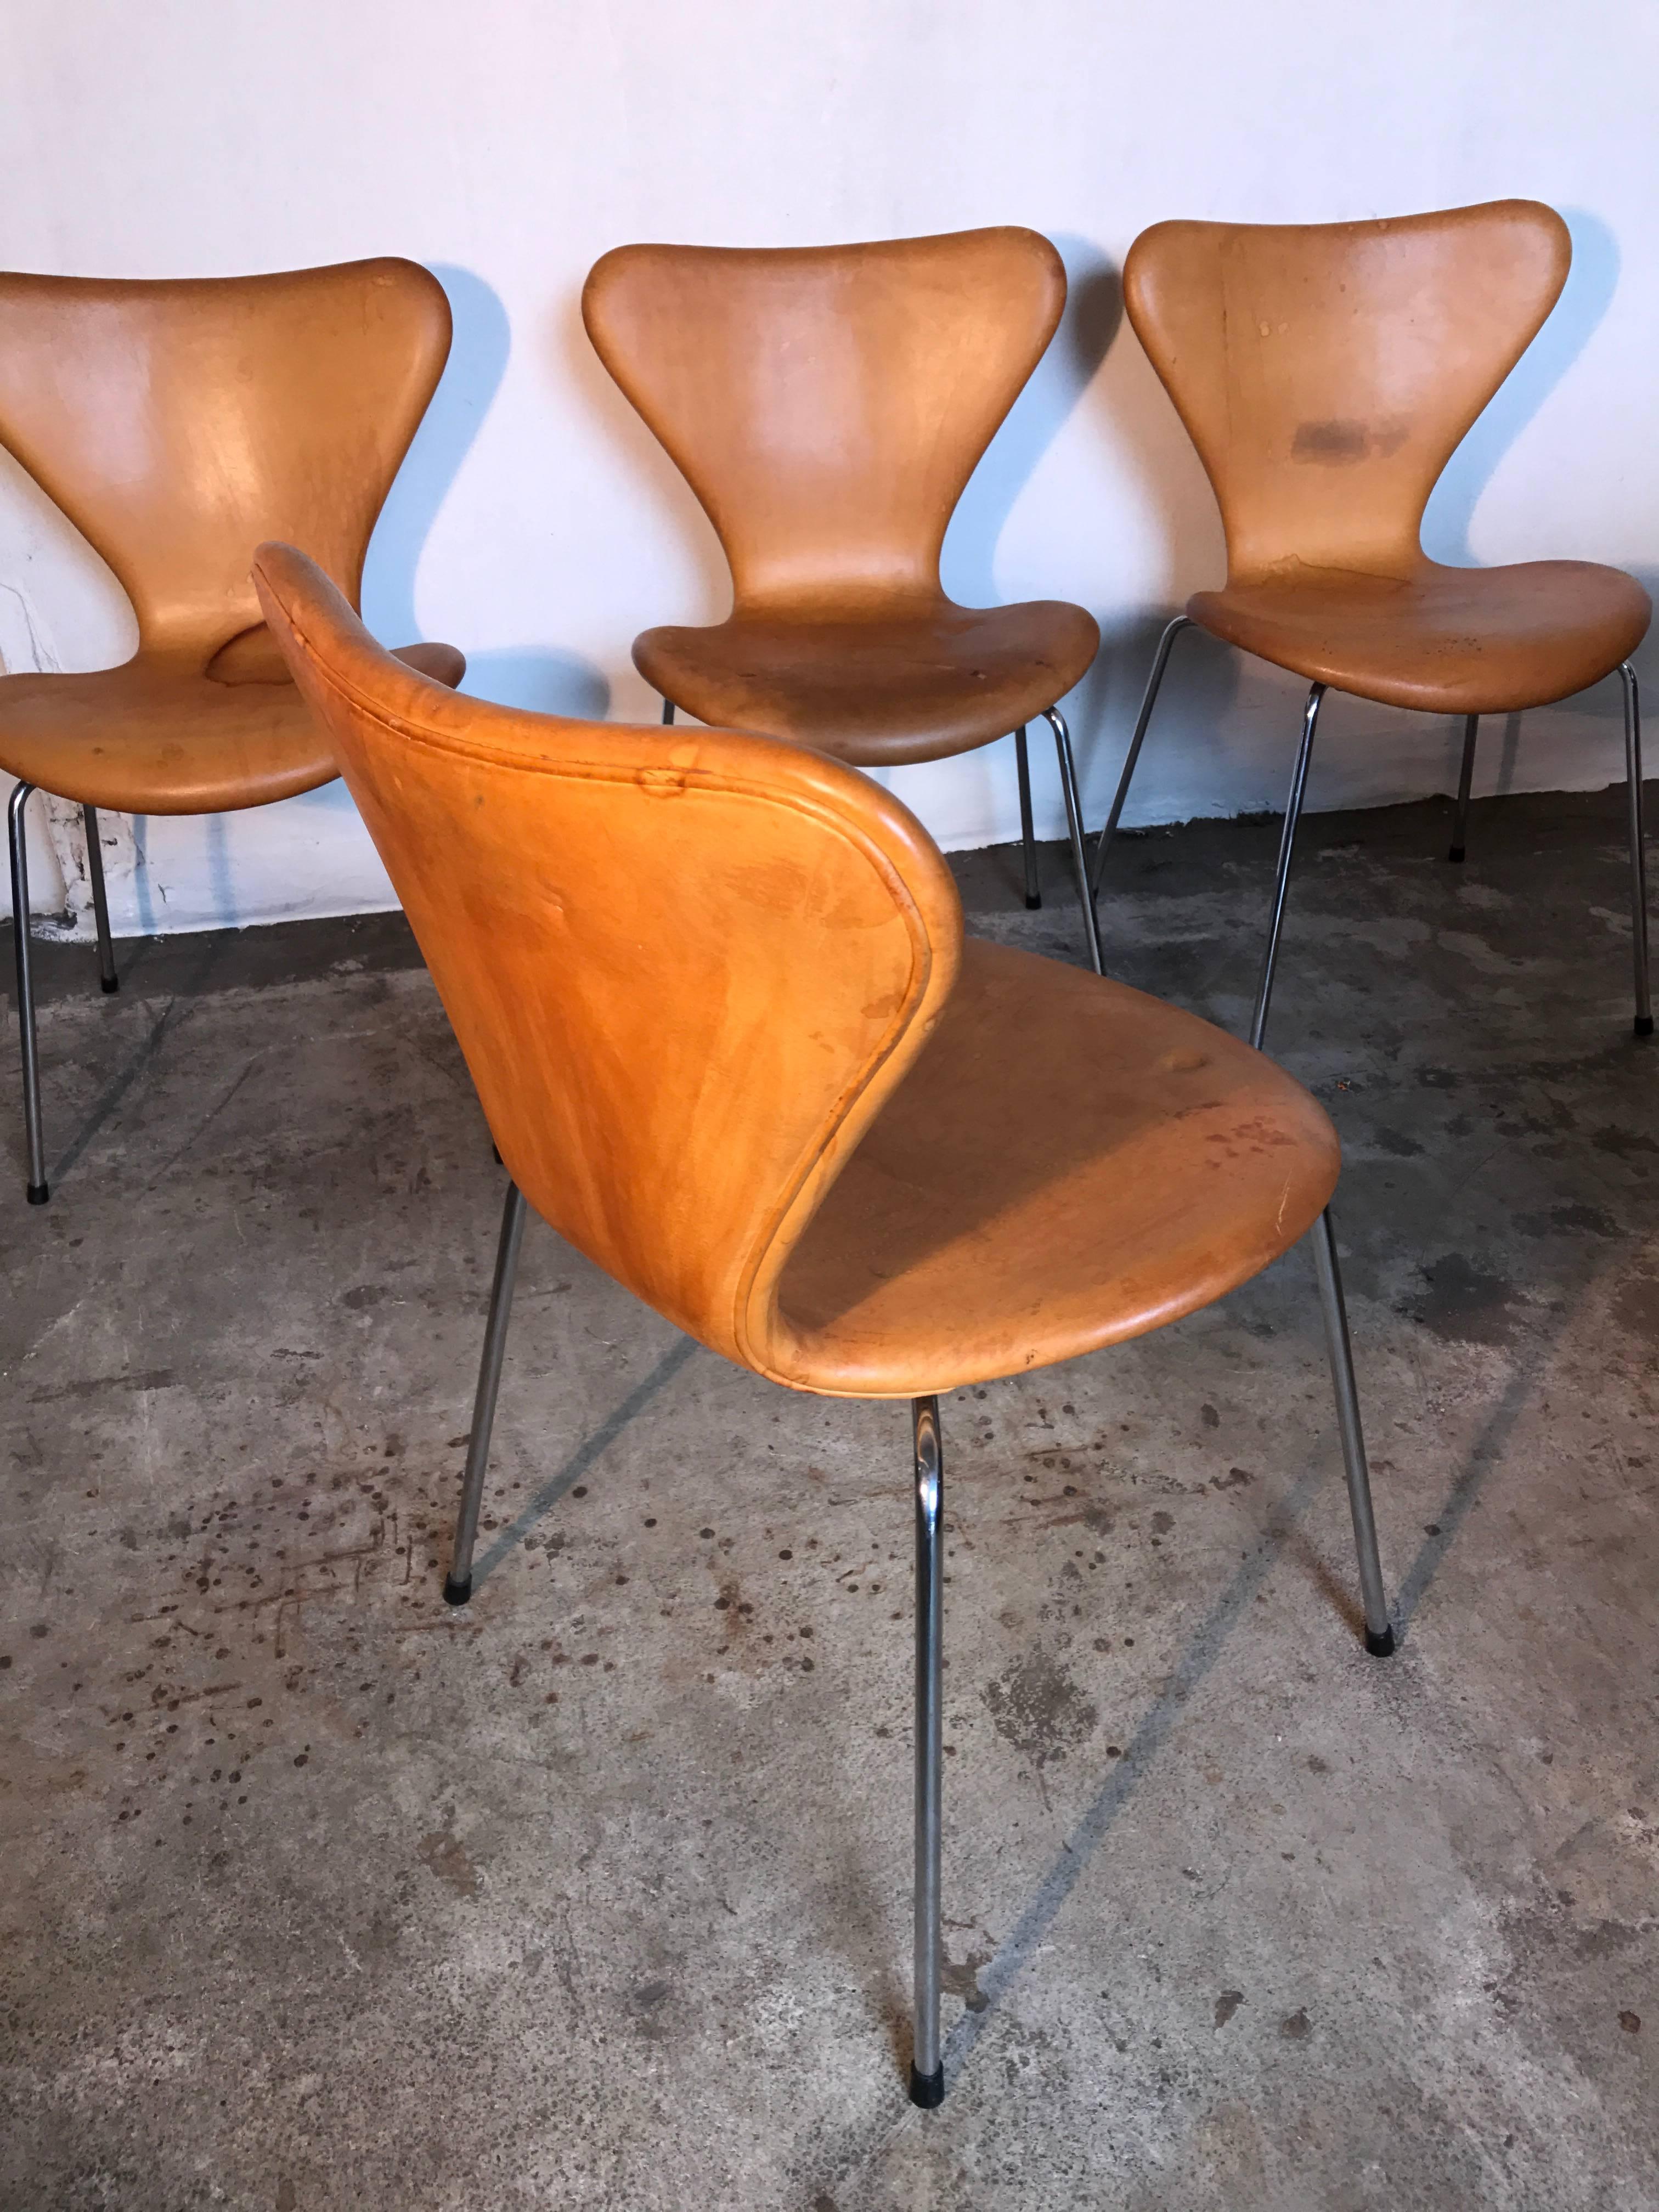 Beautiful Classic design set of six chairs; the so called Butterfly chairs from designer Arne Jacobsen.
Produced in Denmark by Fritz Hansen in the 1950s.
This particular set of six is really great because of the rare and beautiful natural leather